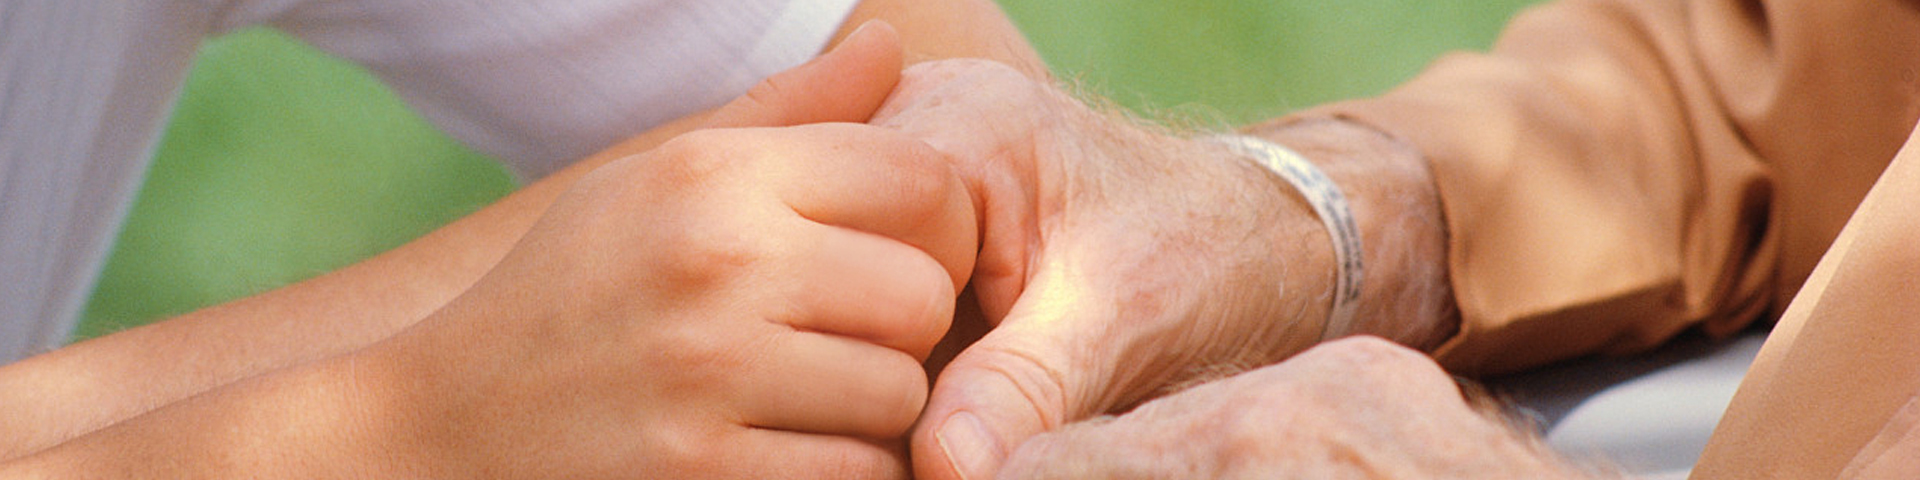 A younger man's hand holds that of an older person in a comforting manner